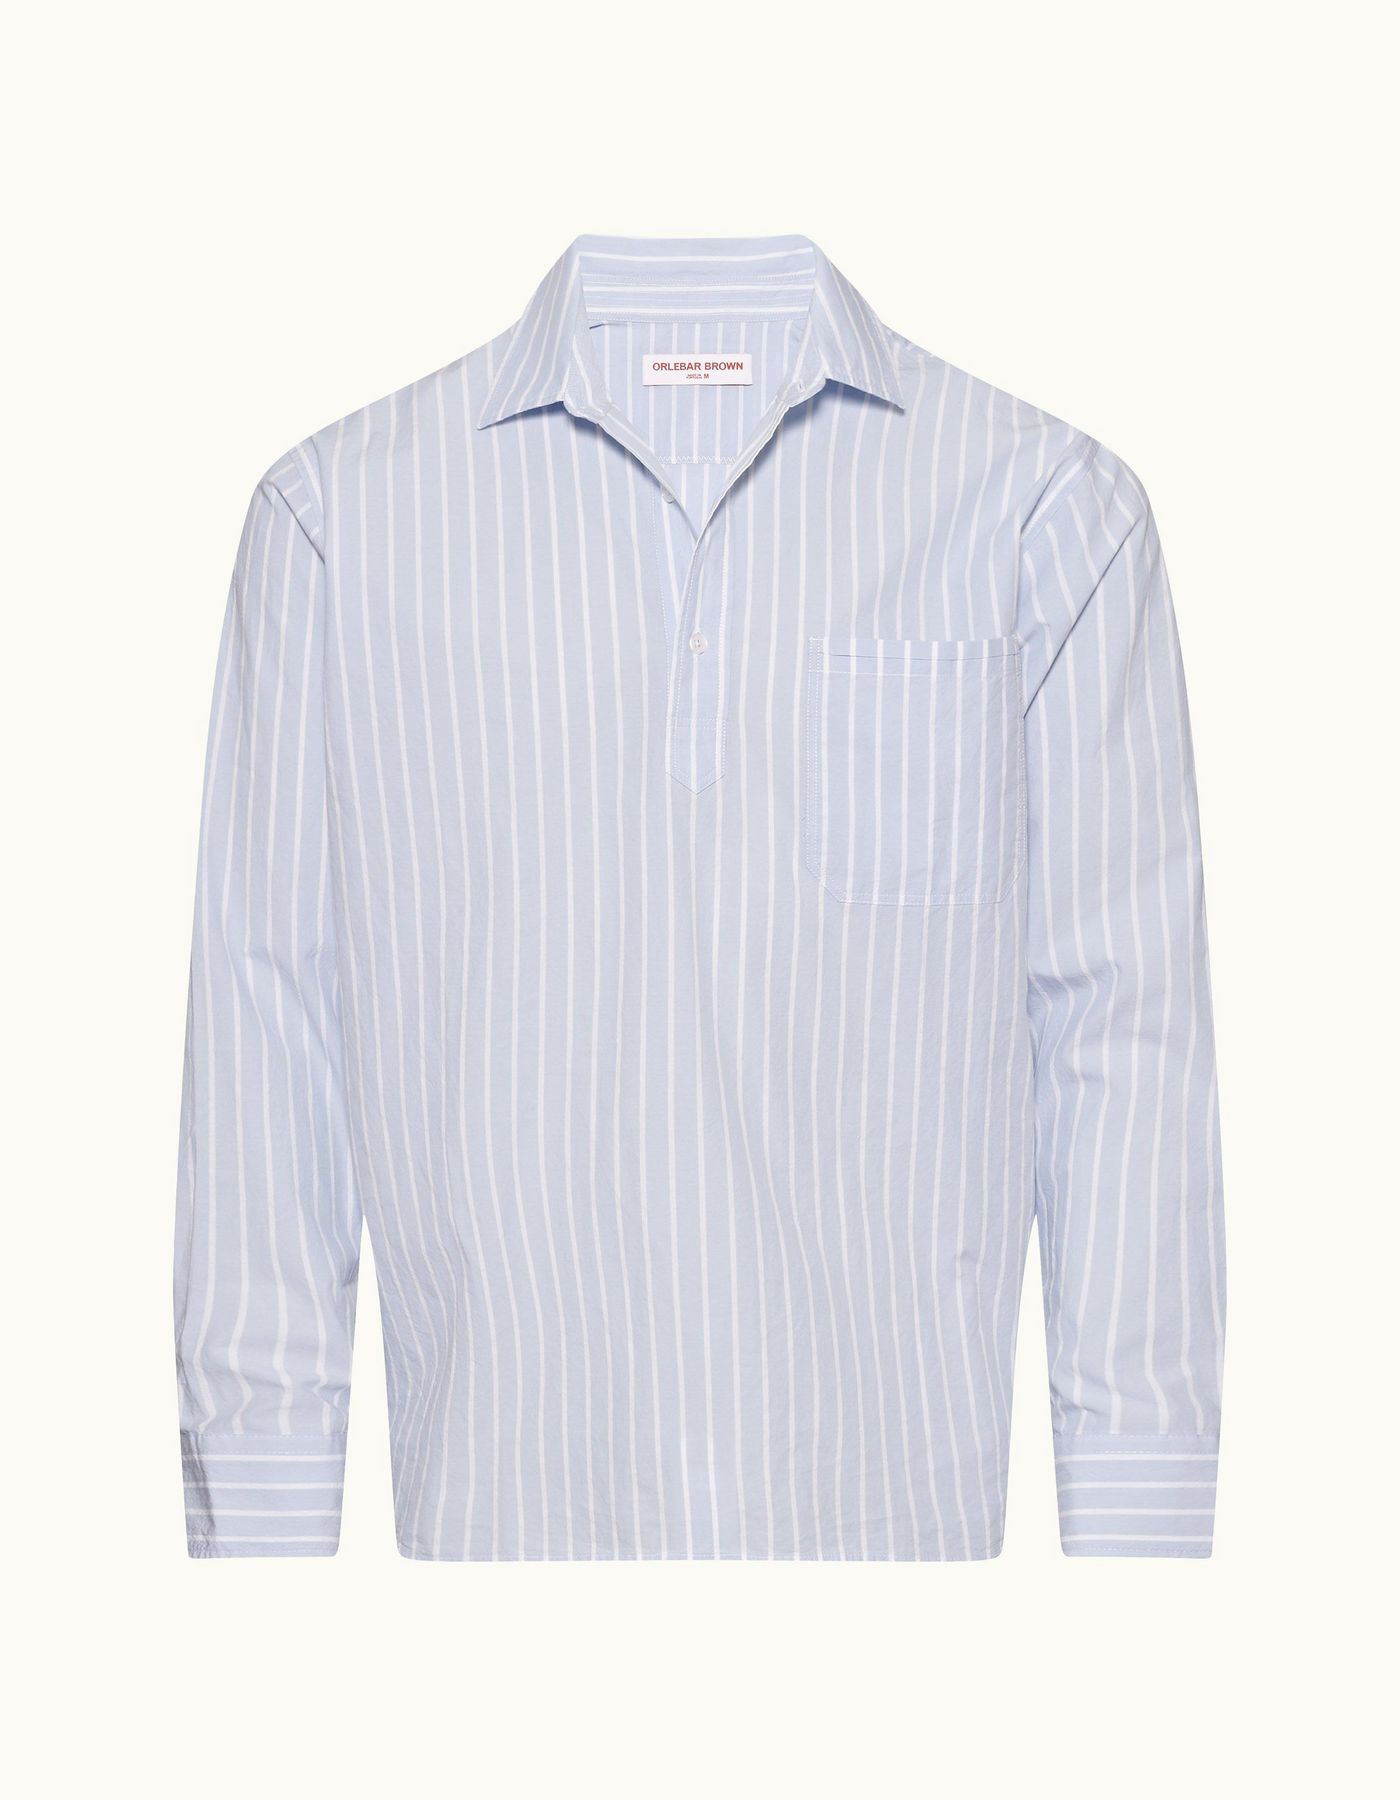 Shanklin - Mens Serenity Blue/White Stripe Relaxed Fit Overhead Cotton Shirt